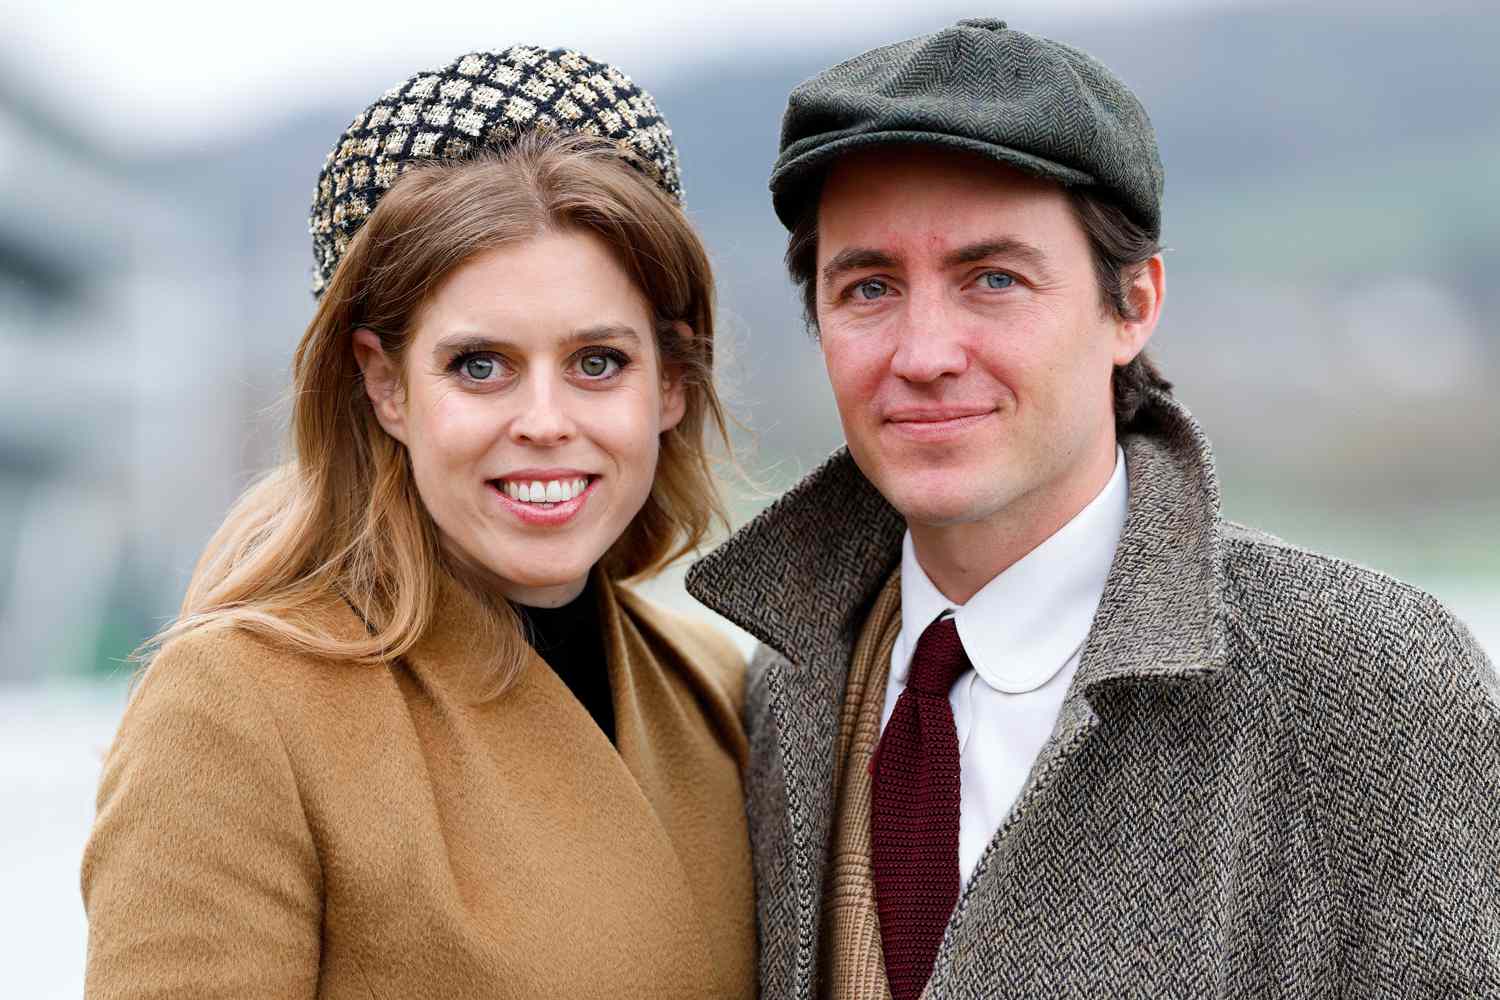 Princess Beatrice and Husband Share a Romantic Kiss in New Wedding Photo Revealed on Their 4th Anniversary